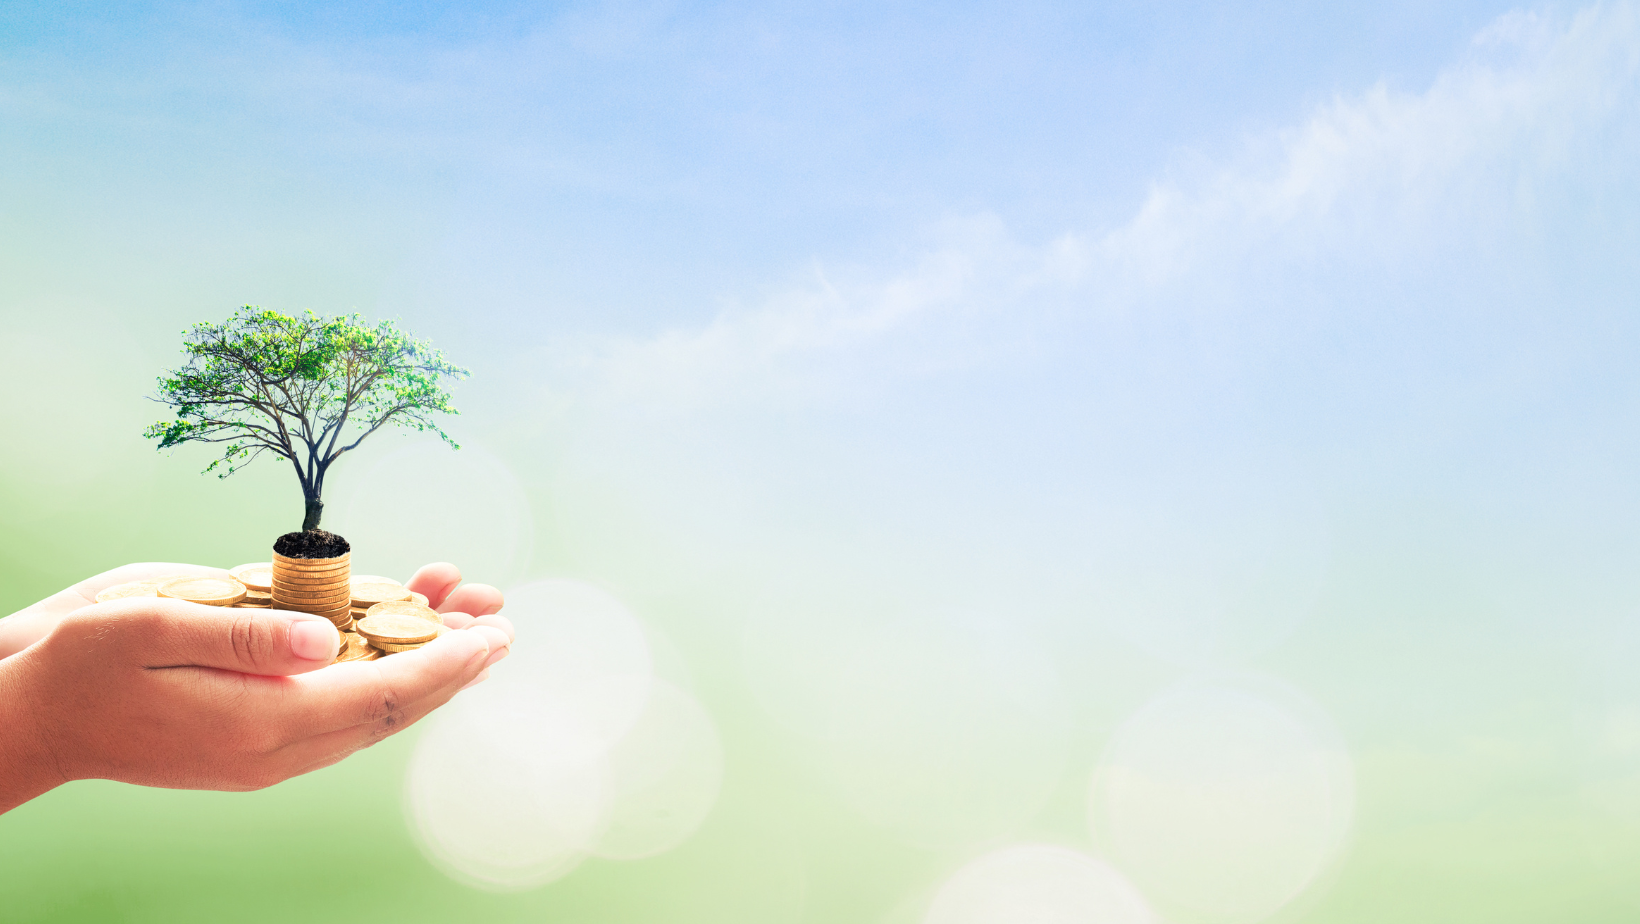 Graphic of hands holding a tiny tree growing out of a stack of gold coins. Background is light blue and green (sky and grass).